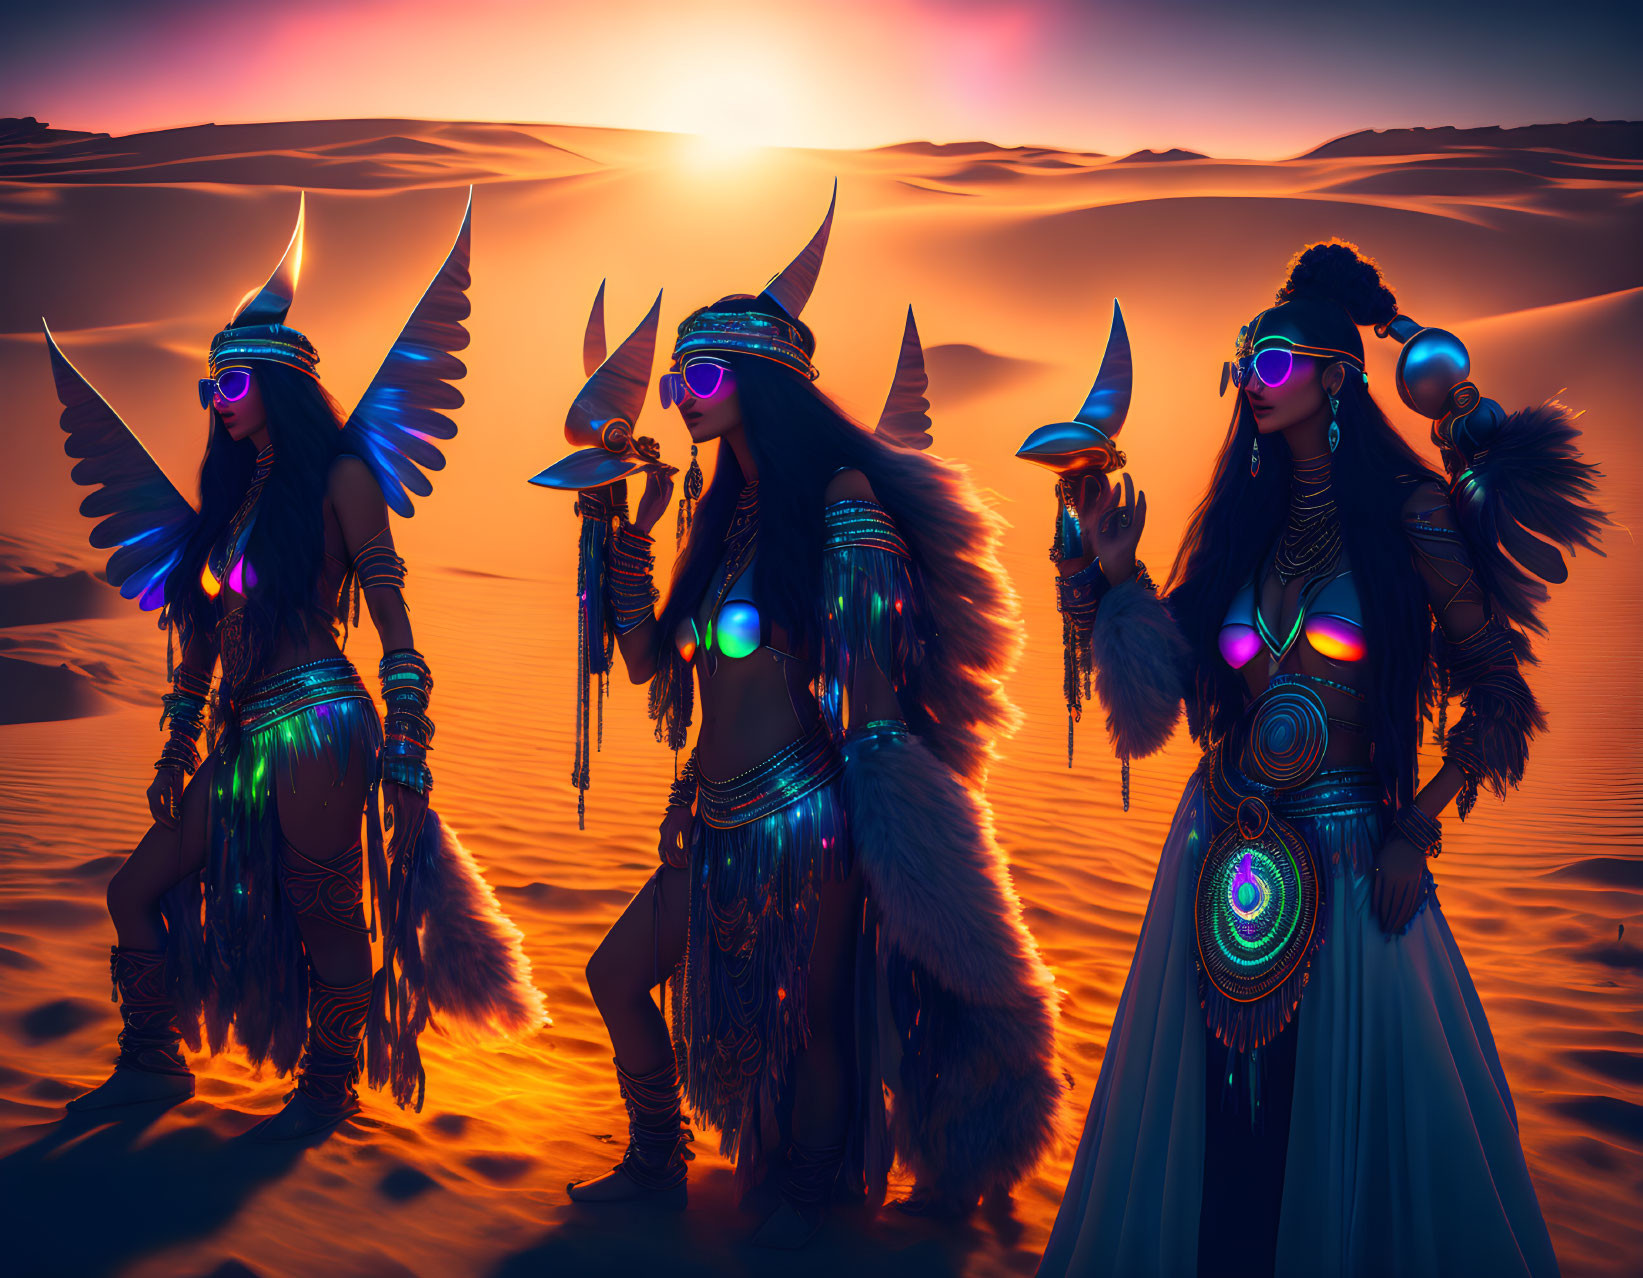 Four mystical women in futuristic tribal attire with wings in desert sunset.